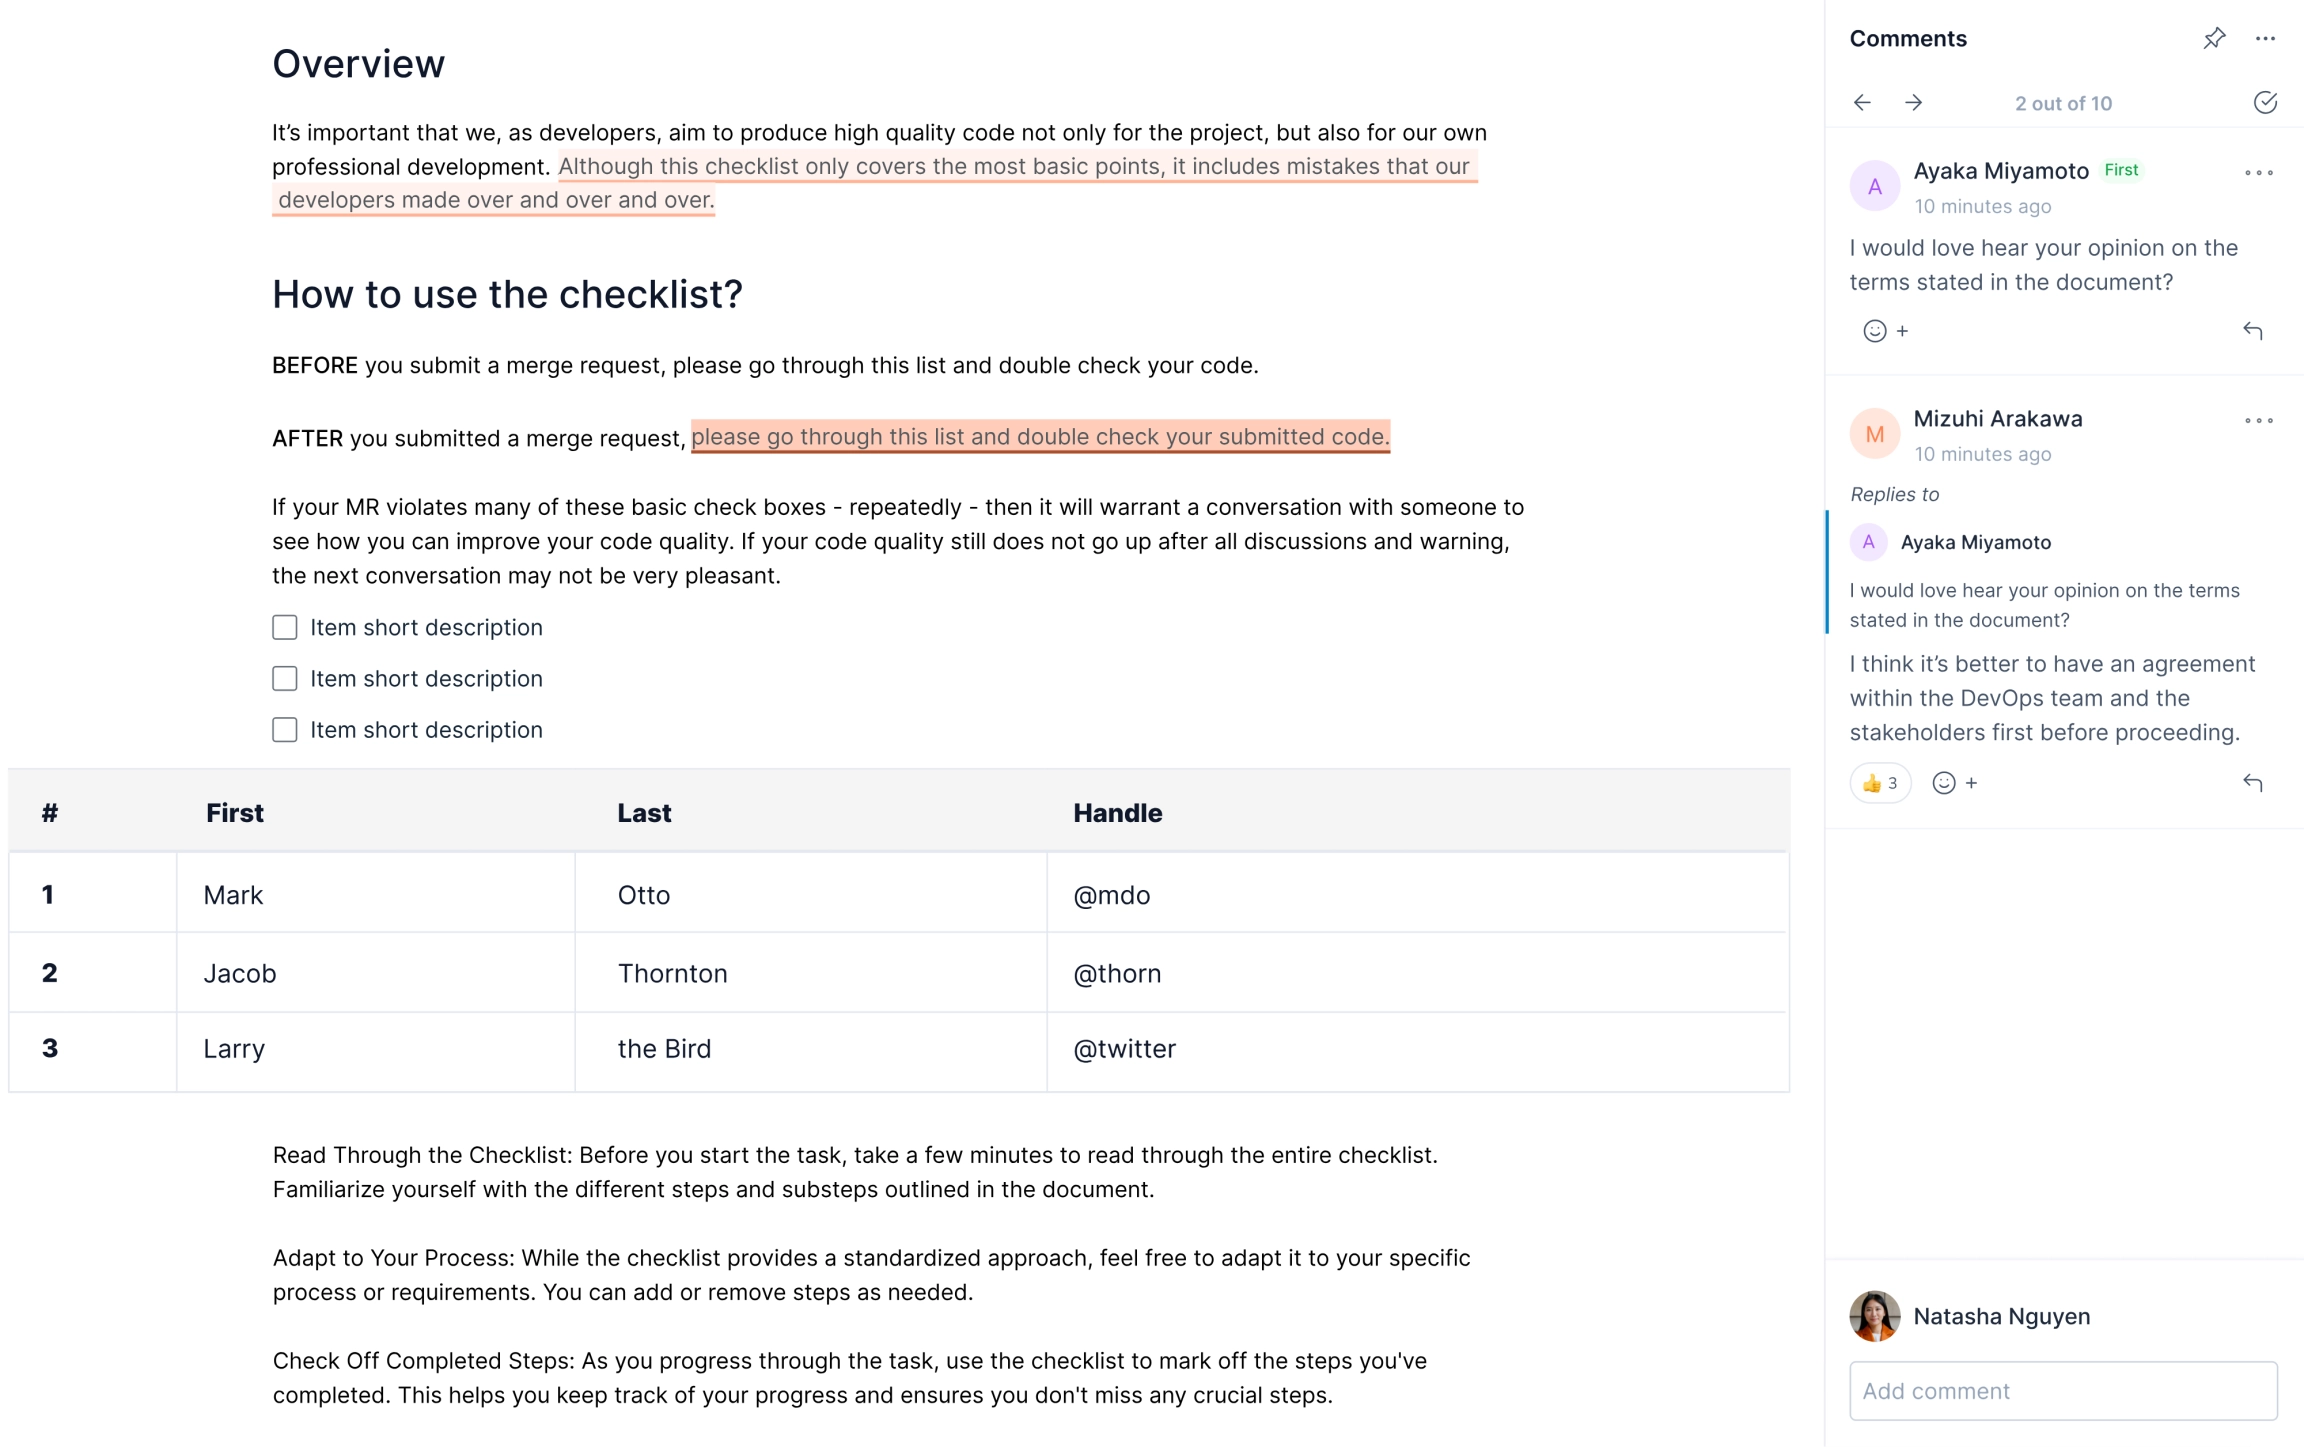 Add and review your comments on the right sidebar in Klever Wiki